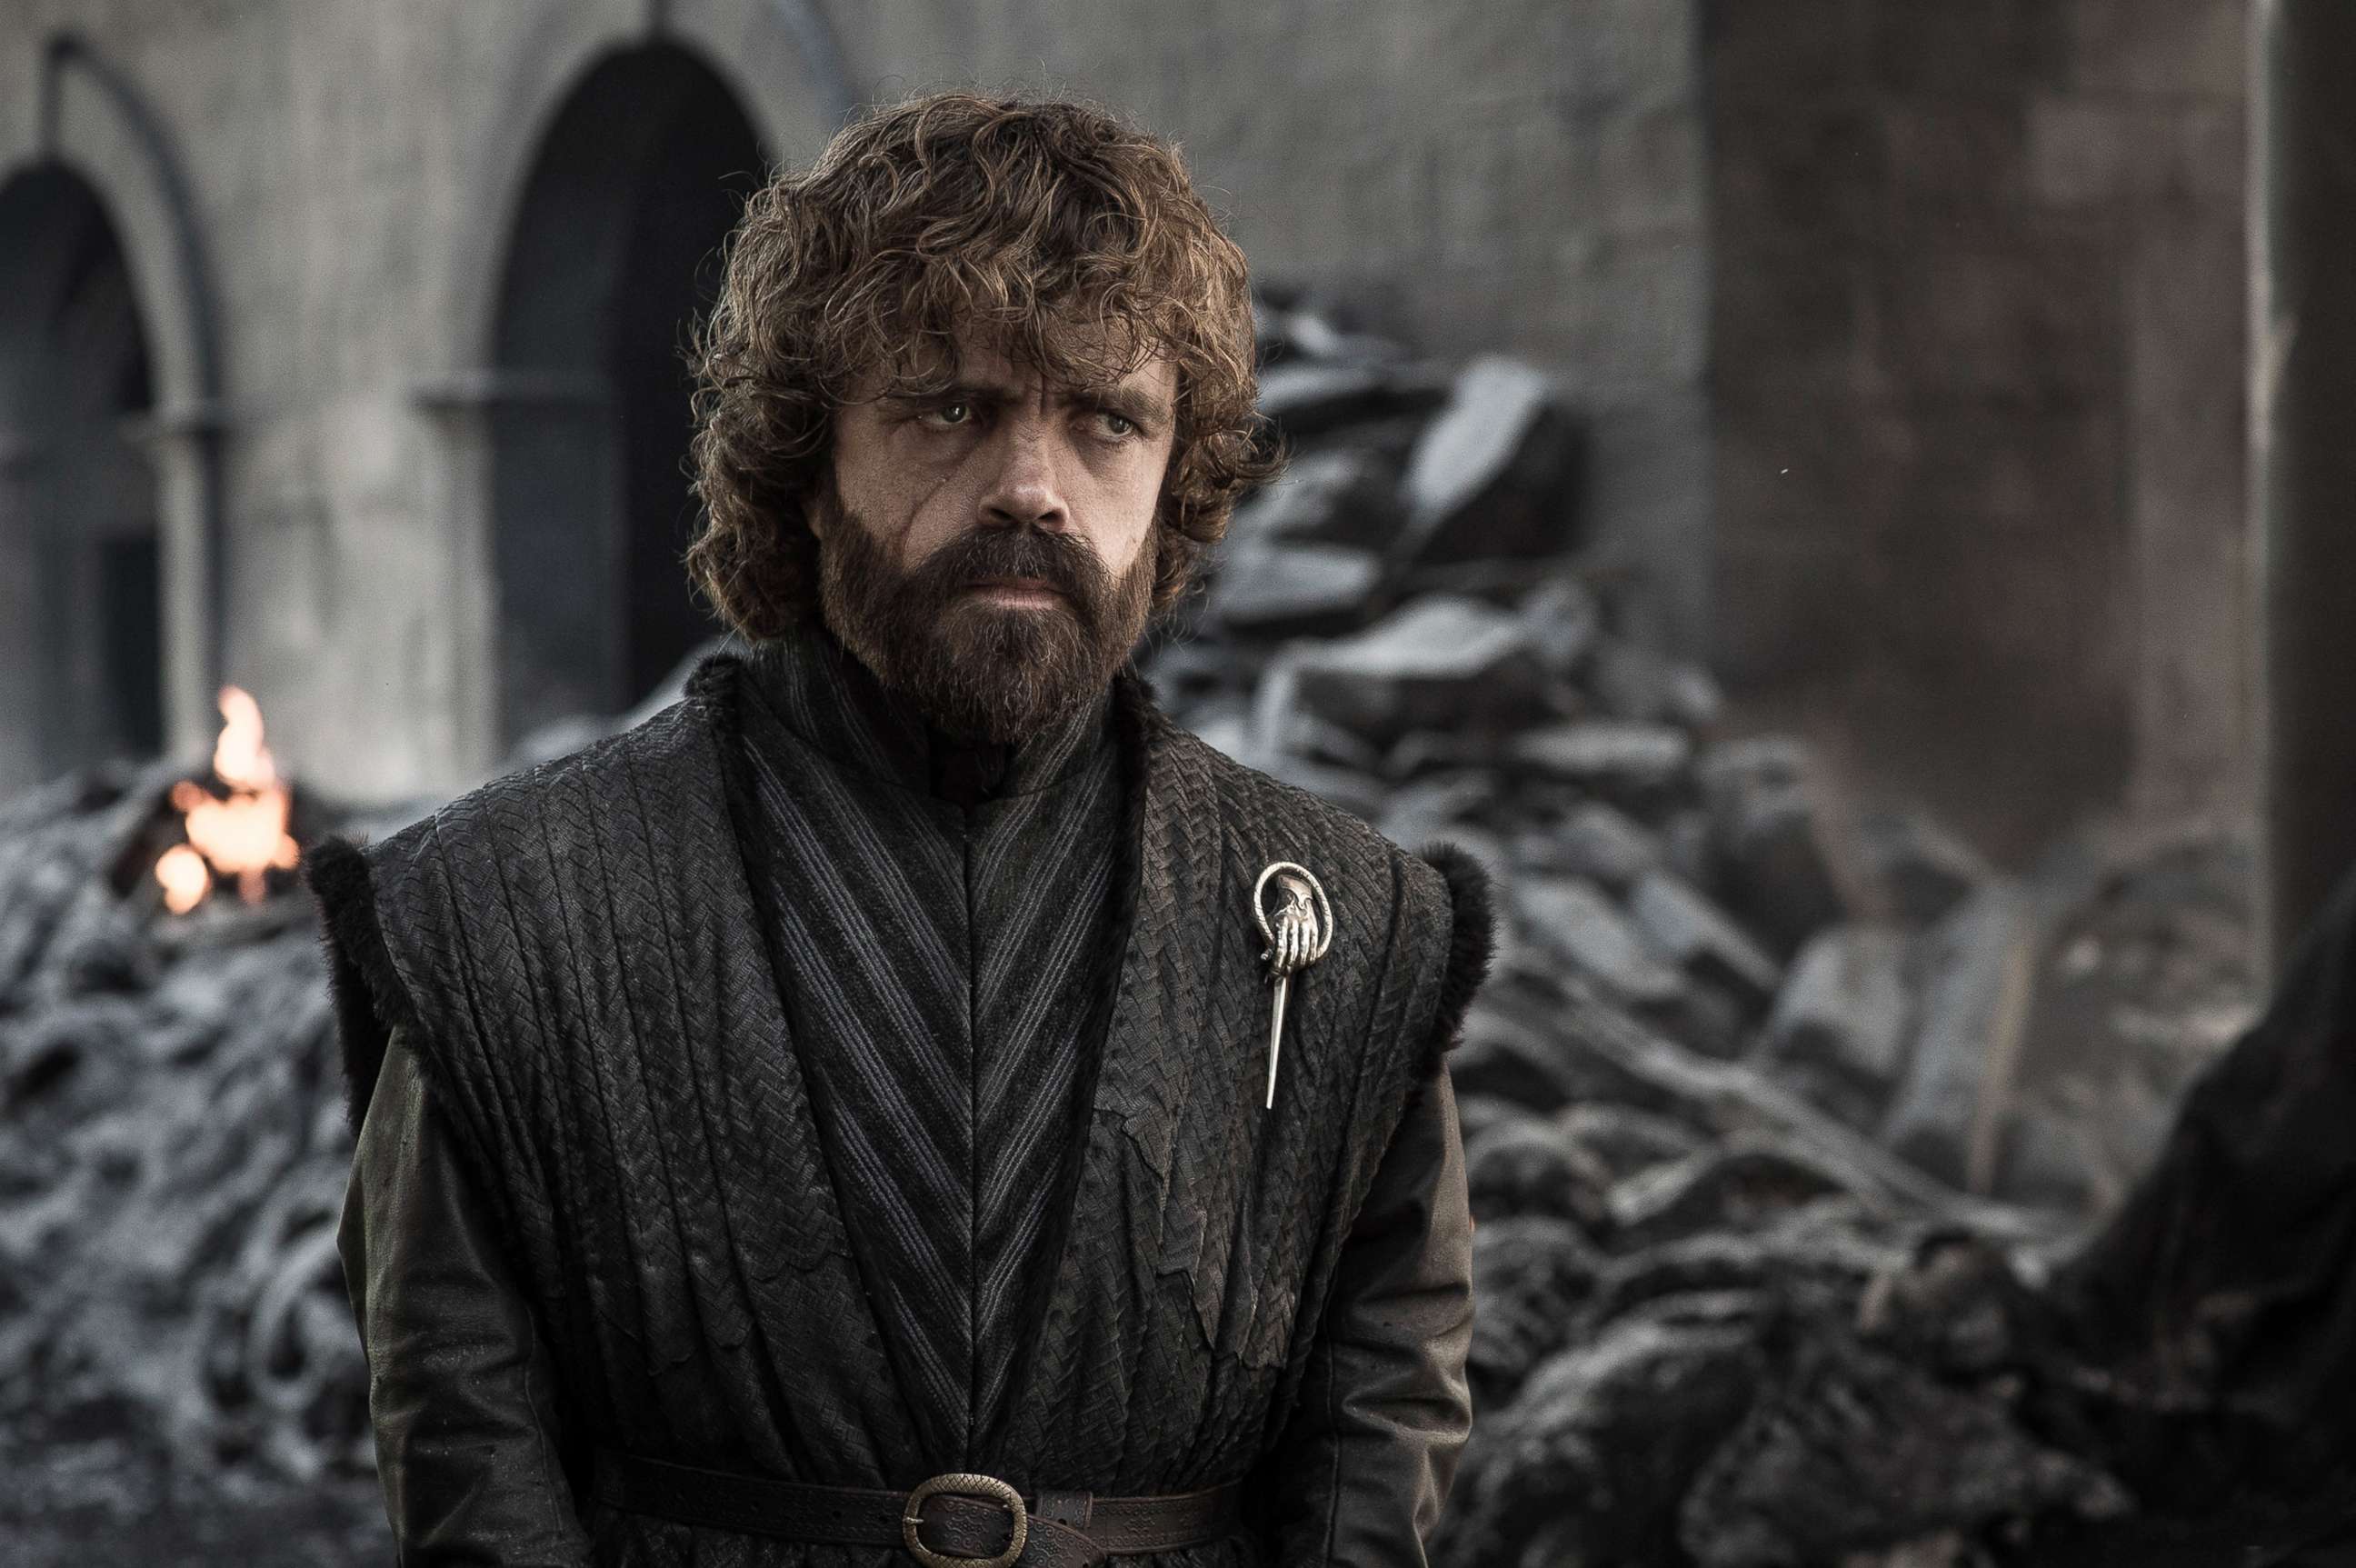 PHOTO: Peter Dinklage in a scene from "Game of Thrones."